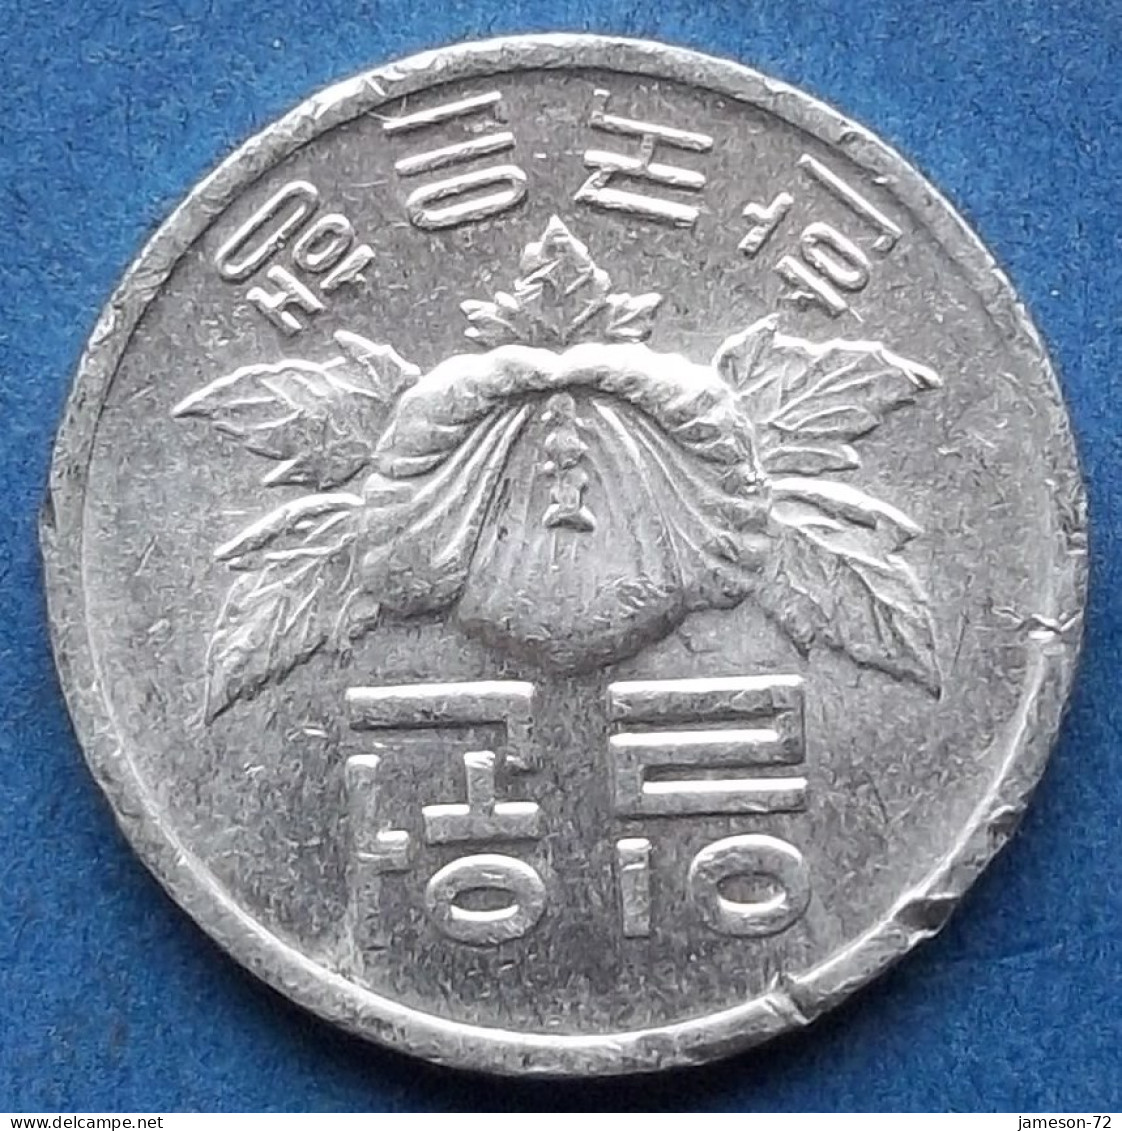 SOUTH KOREA - 1 Won 1982 "Rose Of Sharon" KM# 4a Monetary Reform (1966) - Edelweiss Coins - Coreal Del Sur